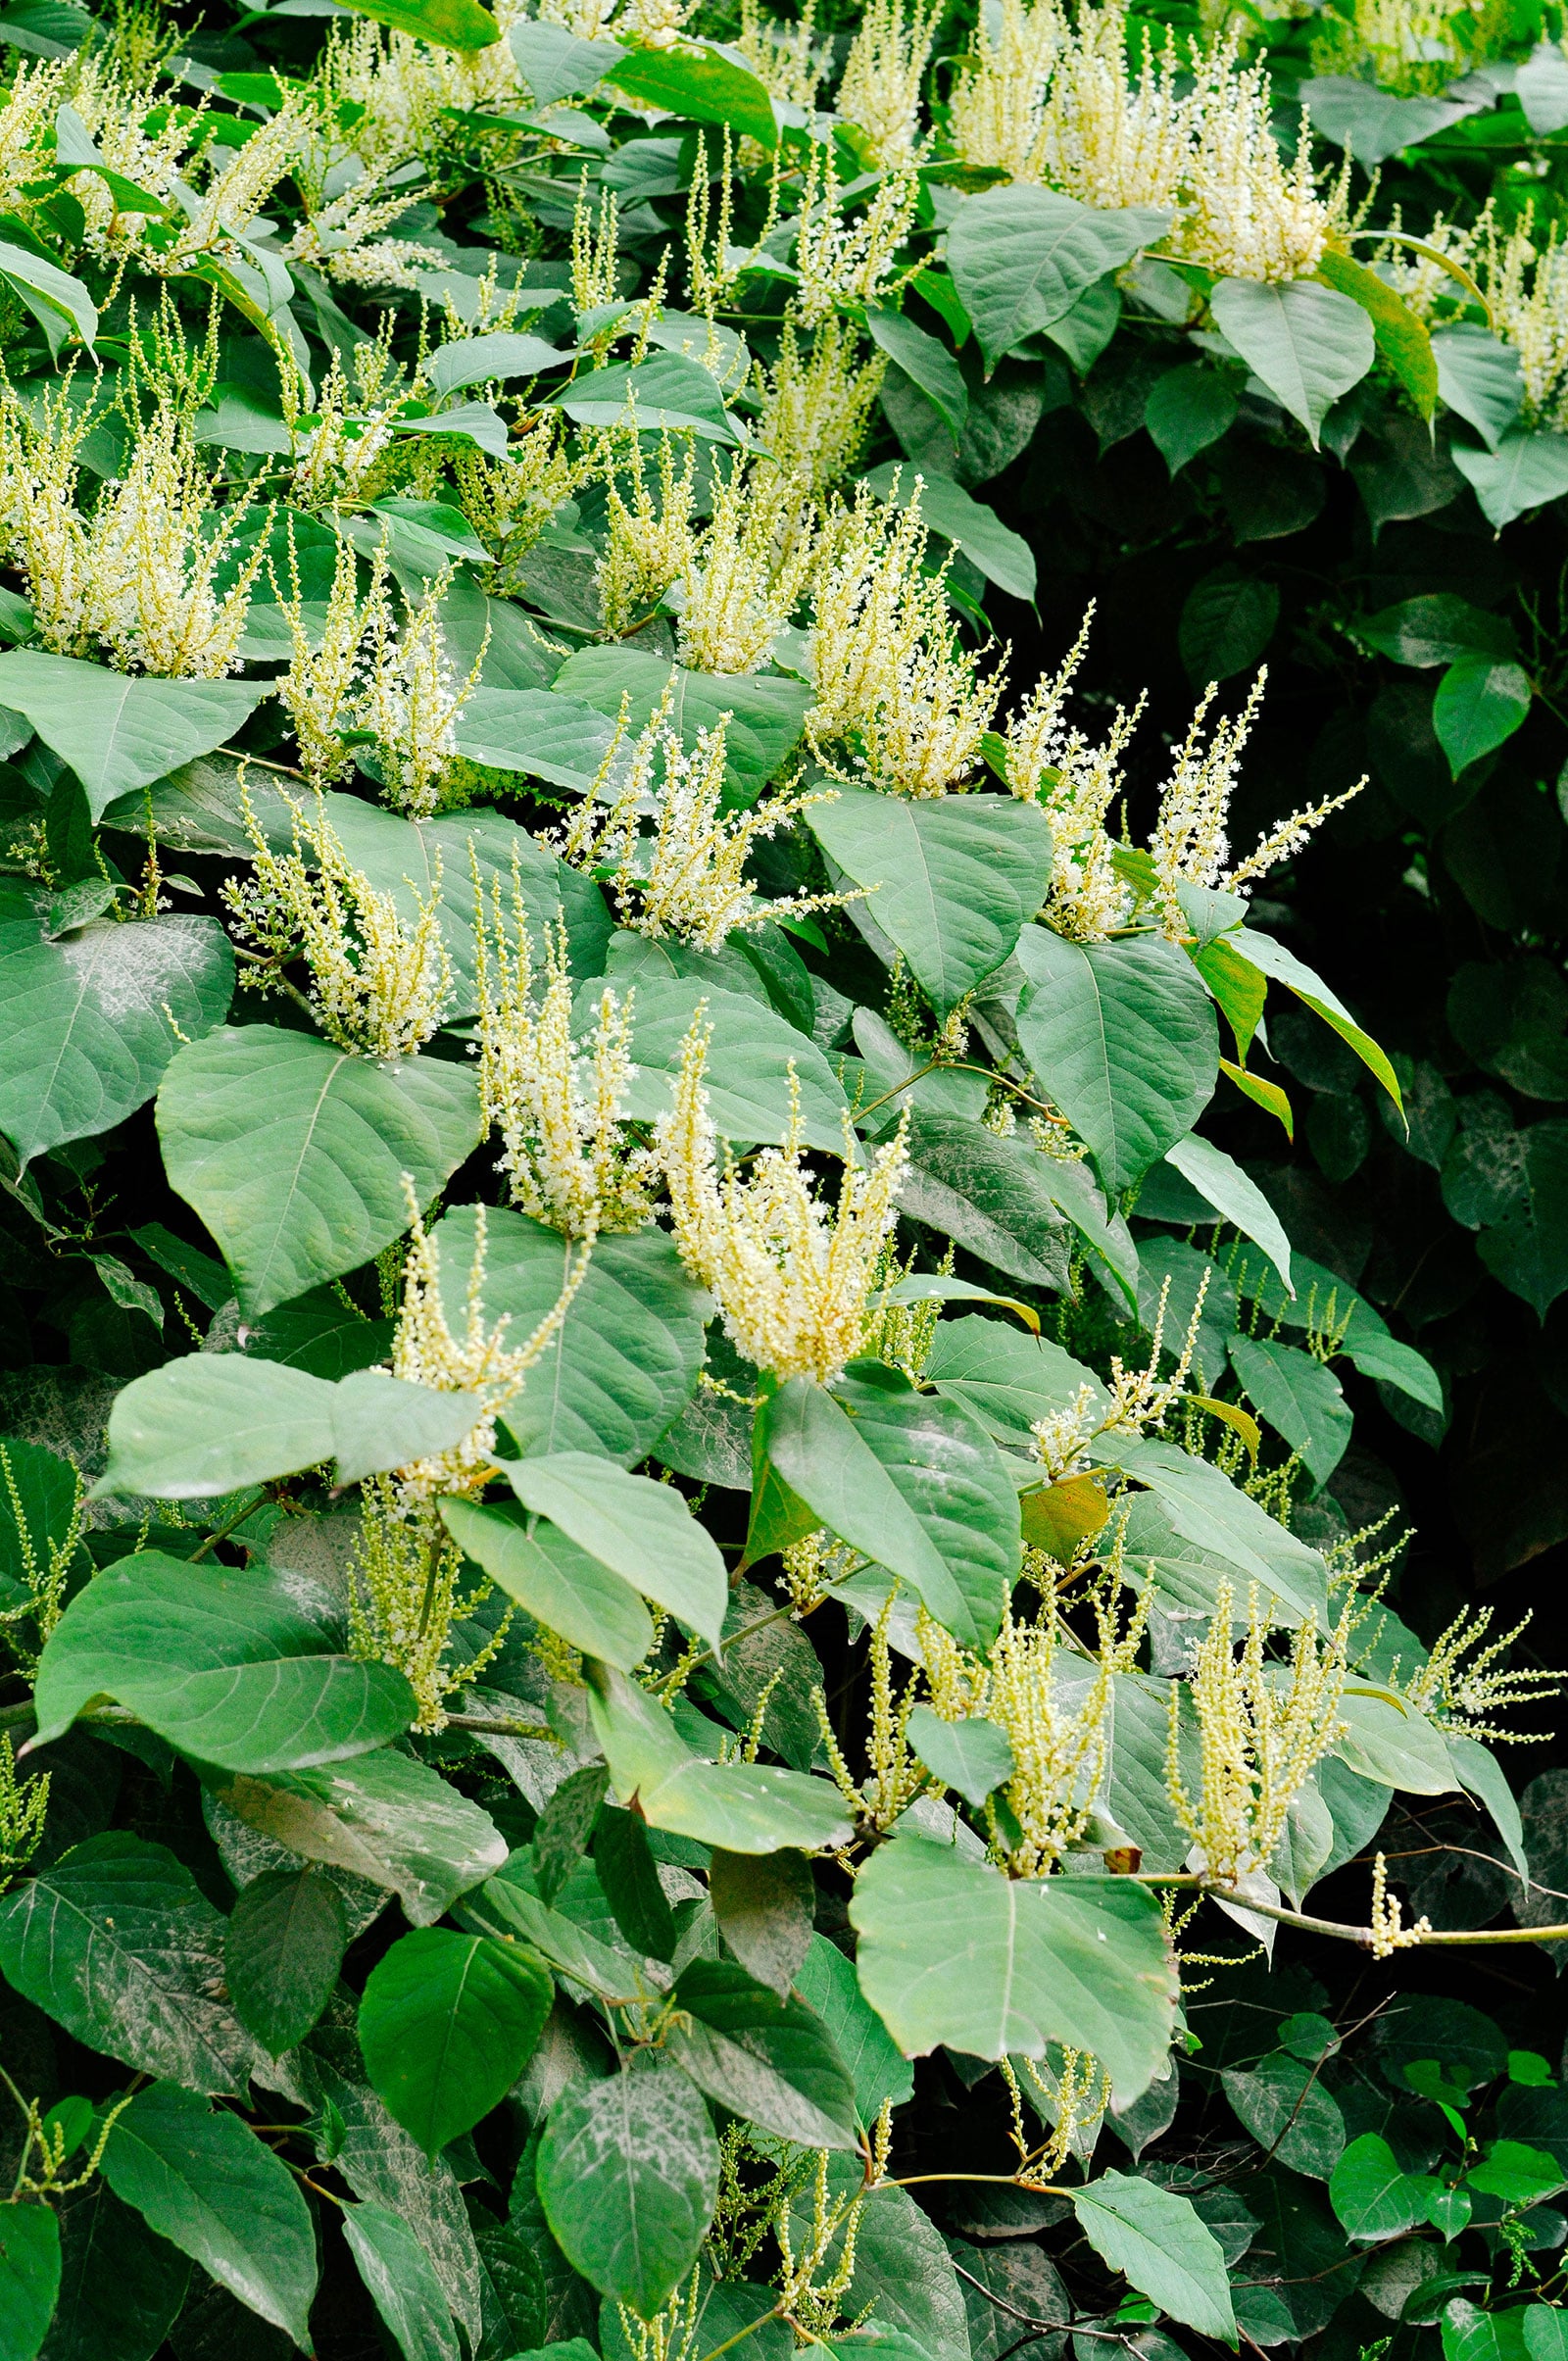 A dense and bushy Japanese knotweed plant in bloom